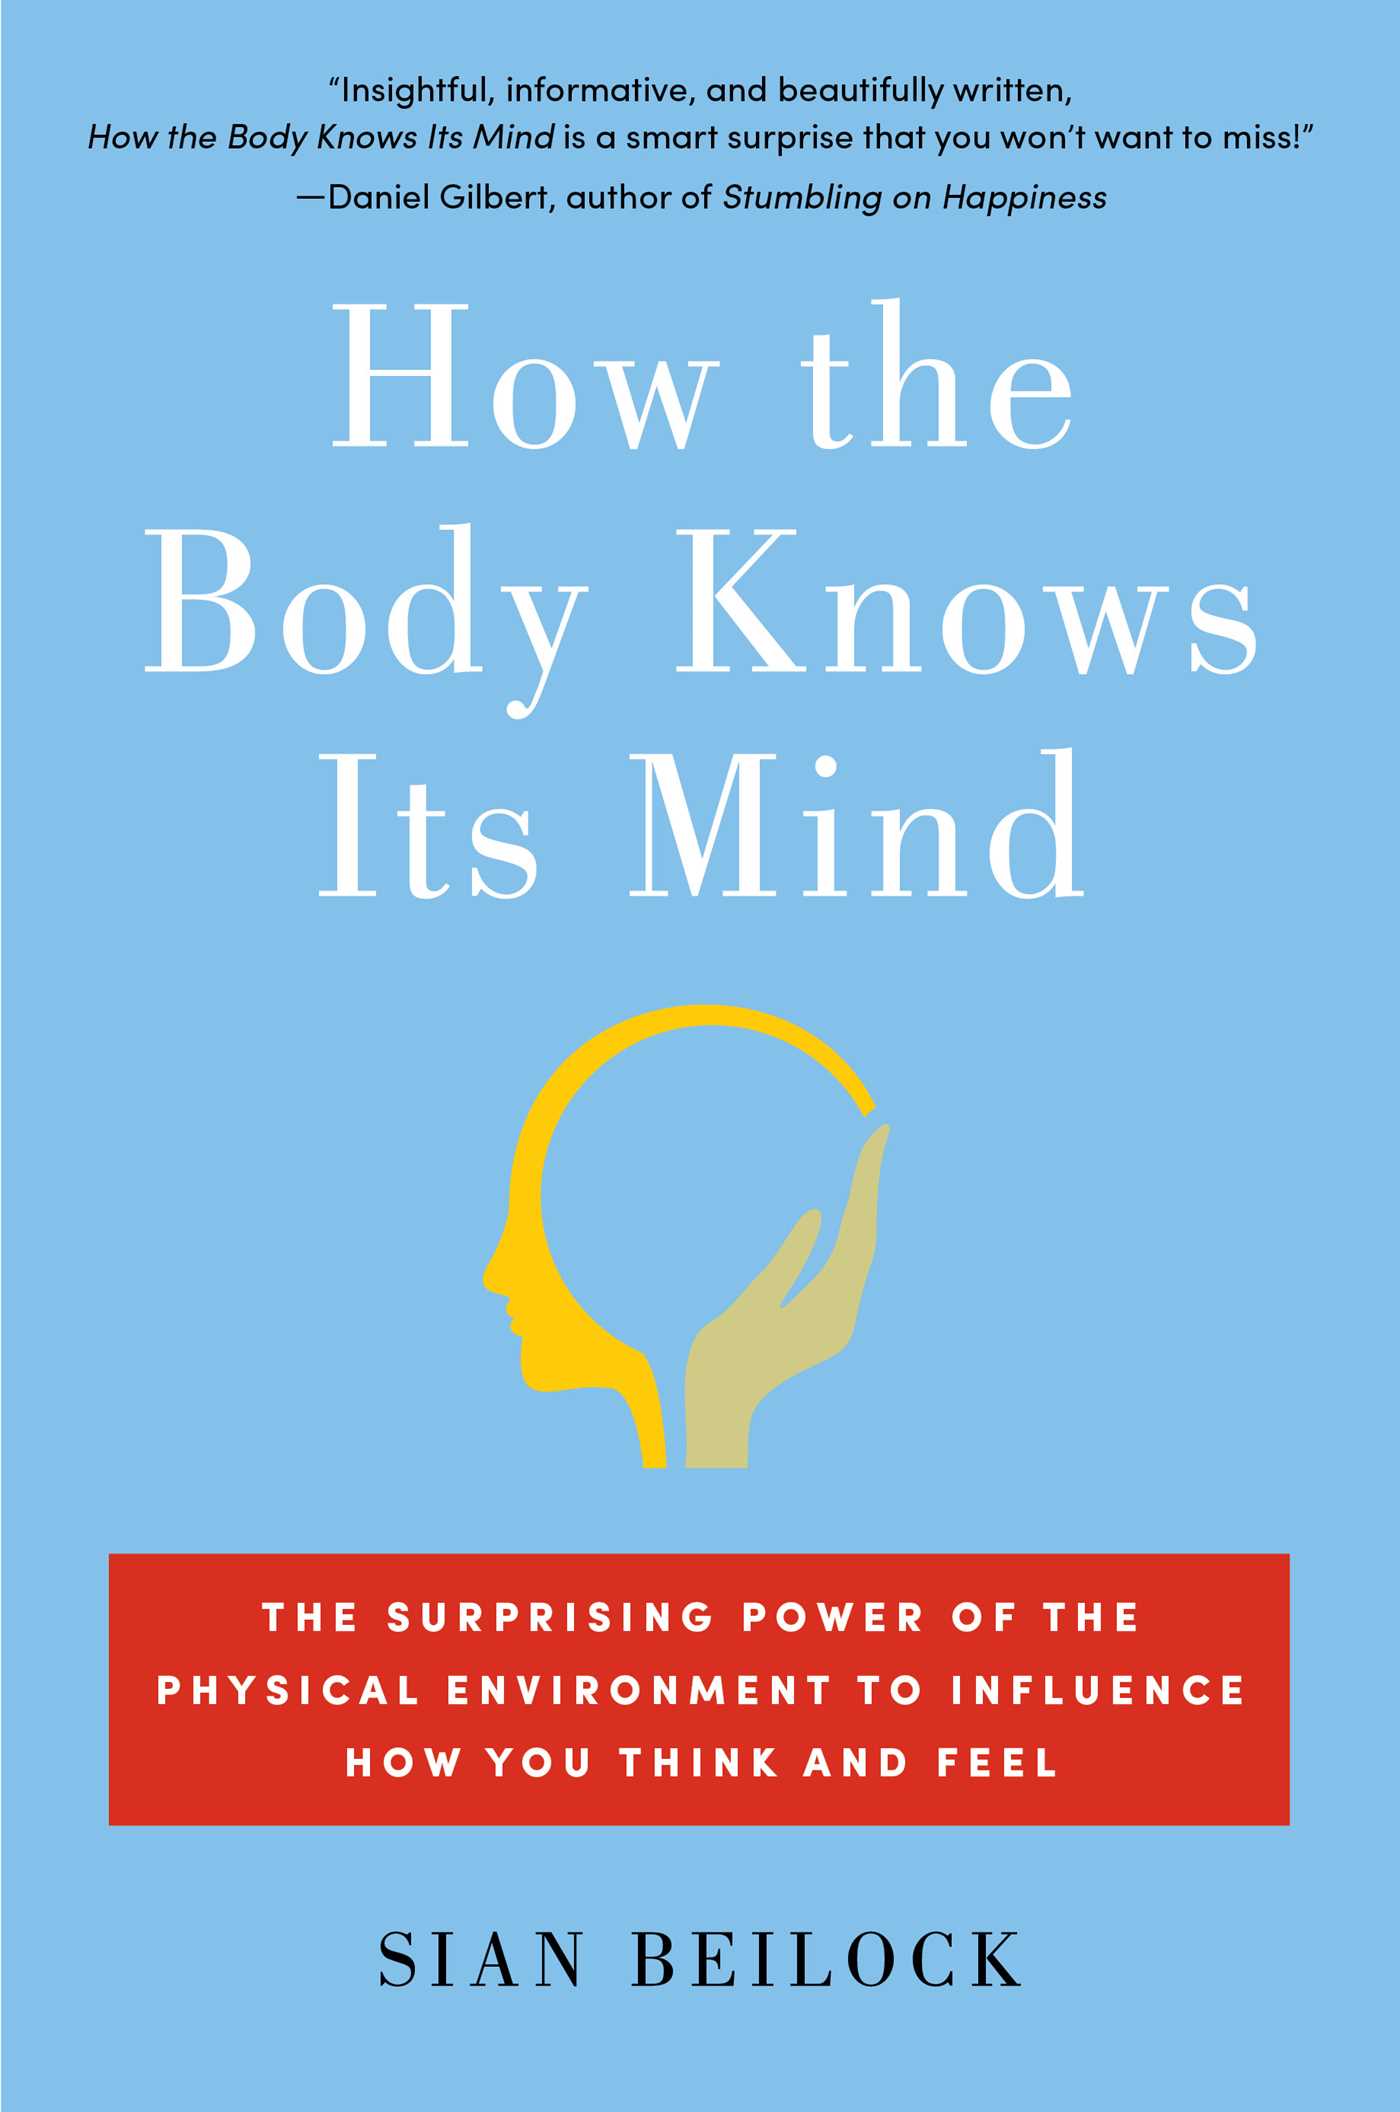 how-the-body-knows-its-mind-9781451626681_hr